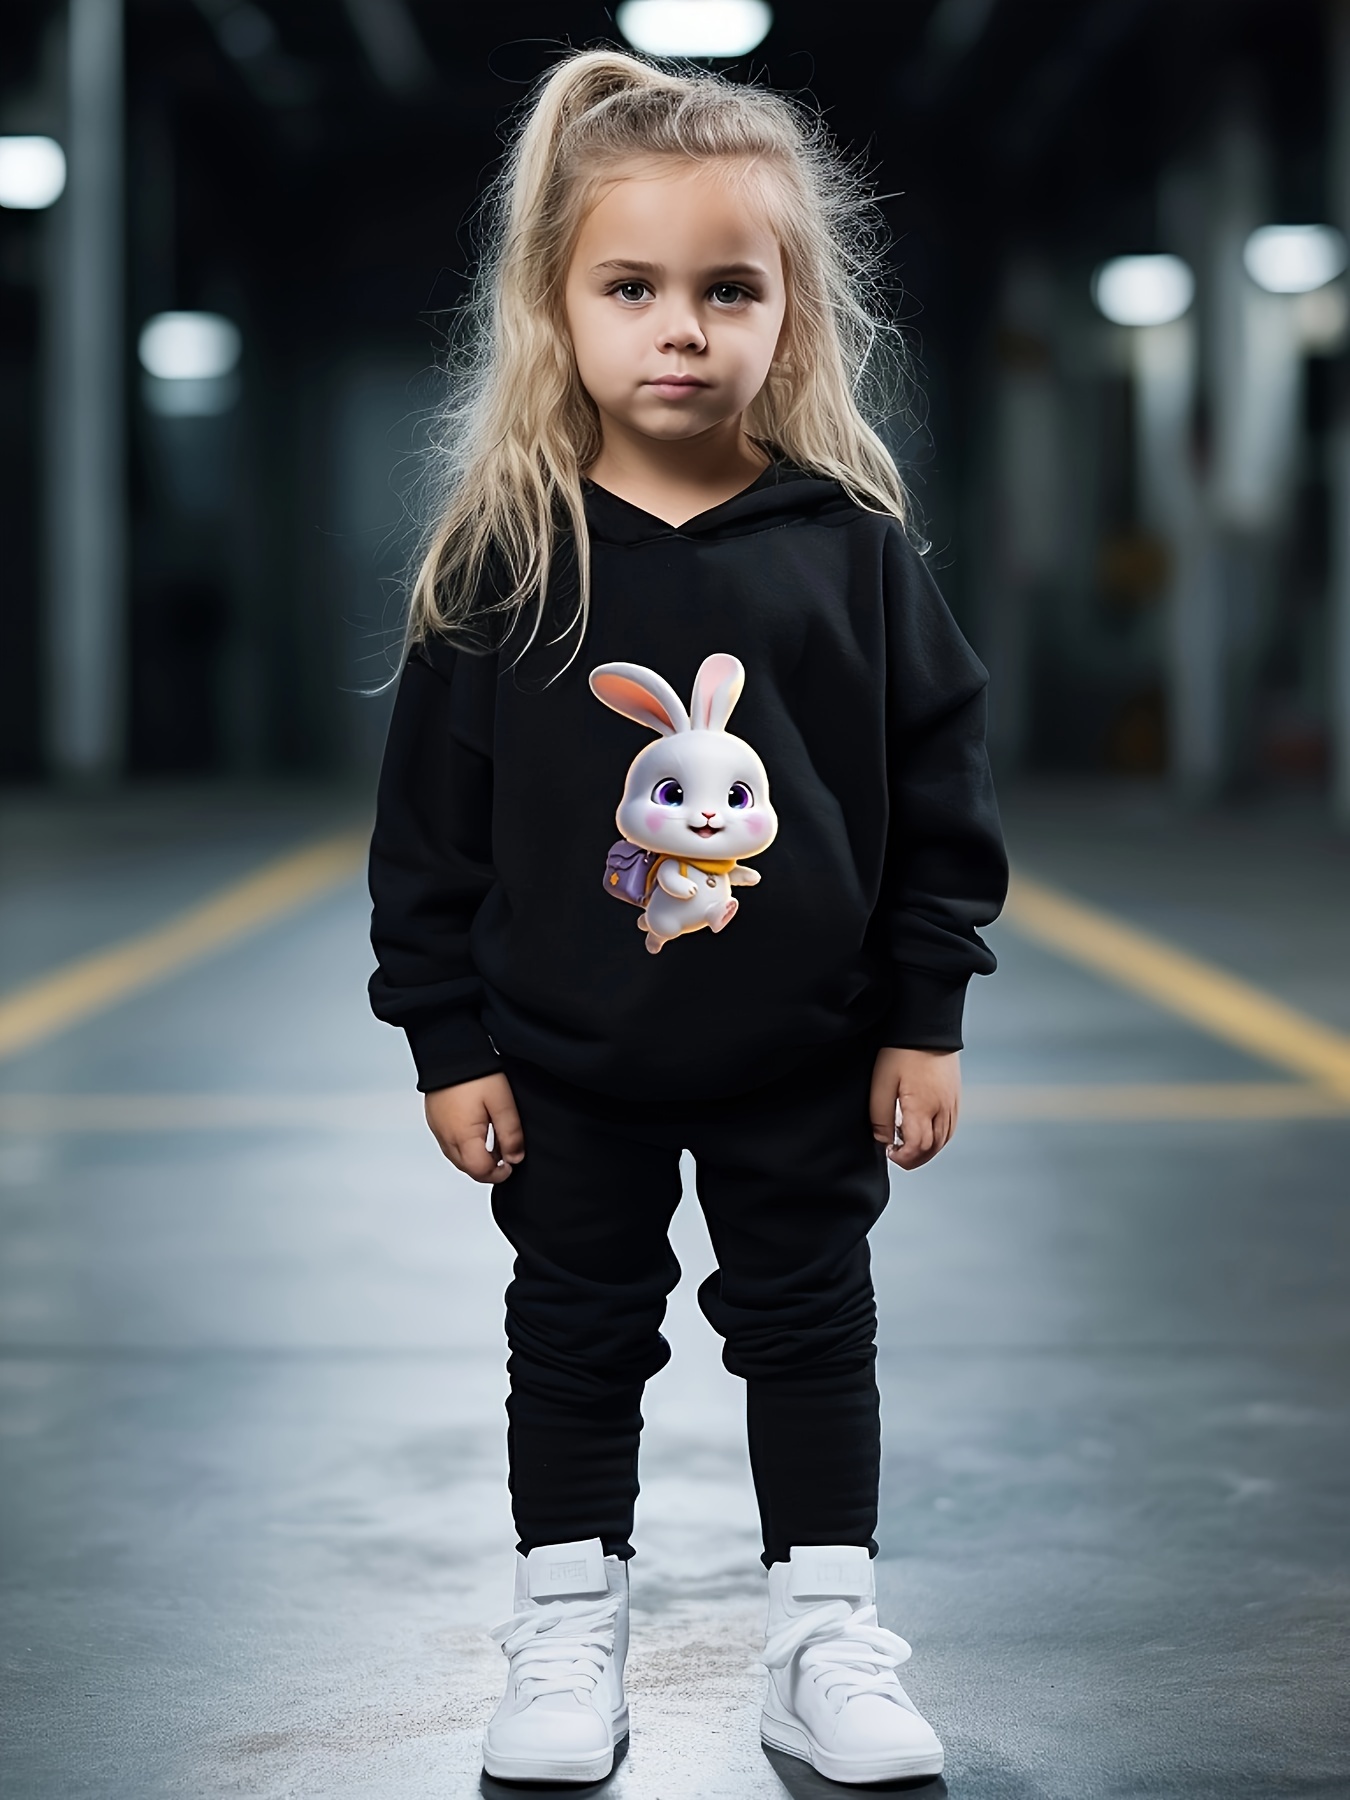 Girls Sporty Tracksuit Set Hooded Sweatshirt And Pants For Ages 4 13,  Breathable Cotton Blend, Ideal For Spring & Autumn From Xjychildshop,  $20.58